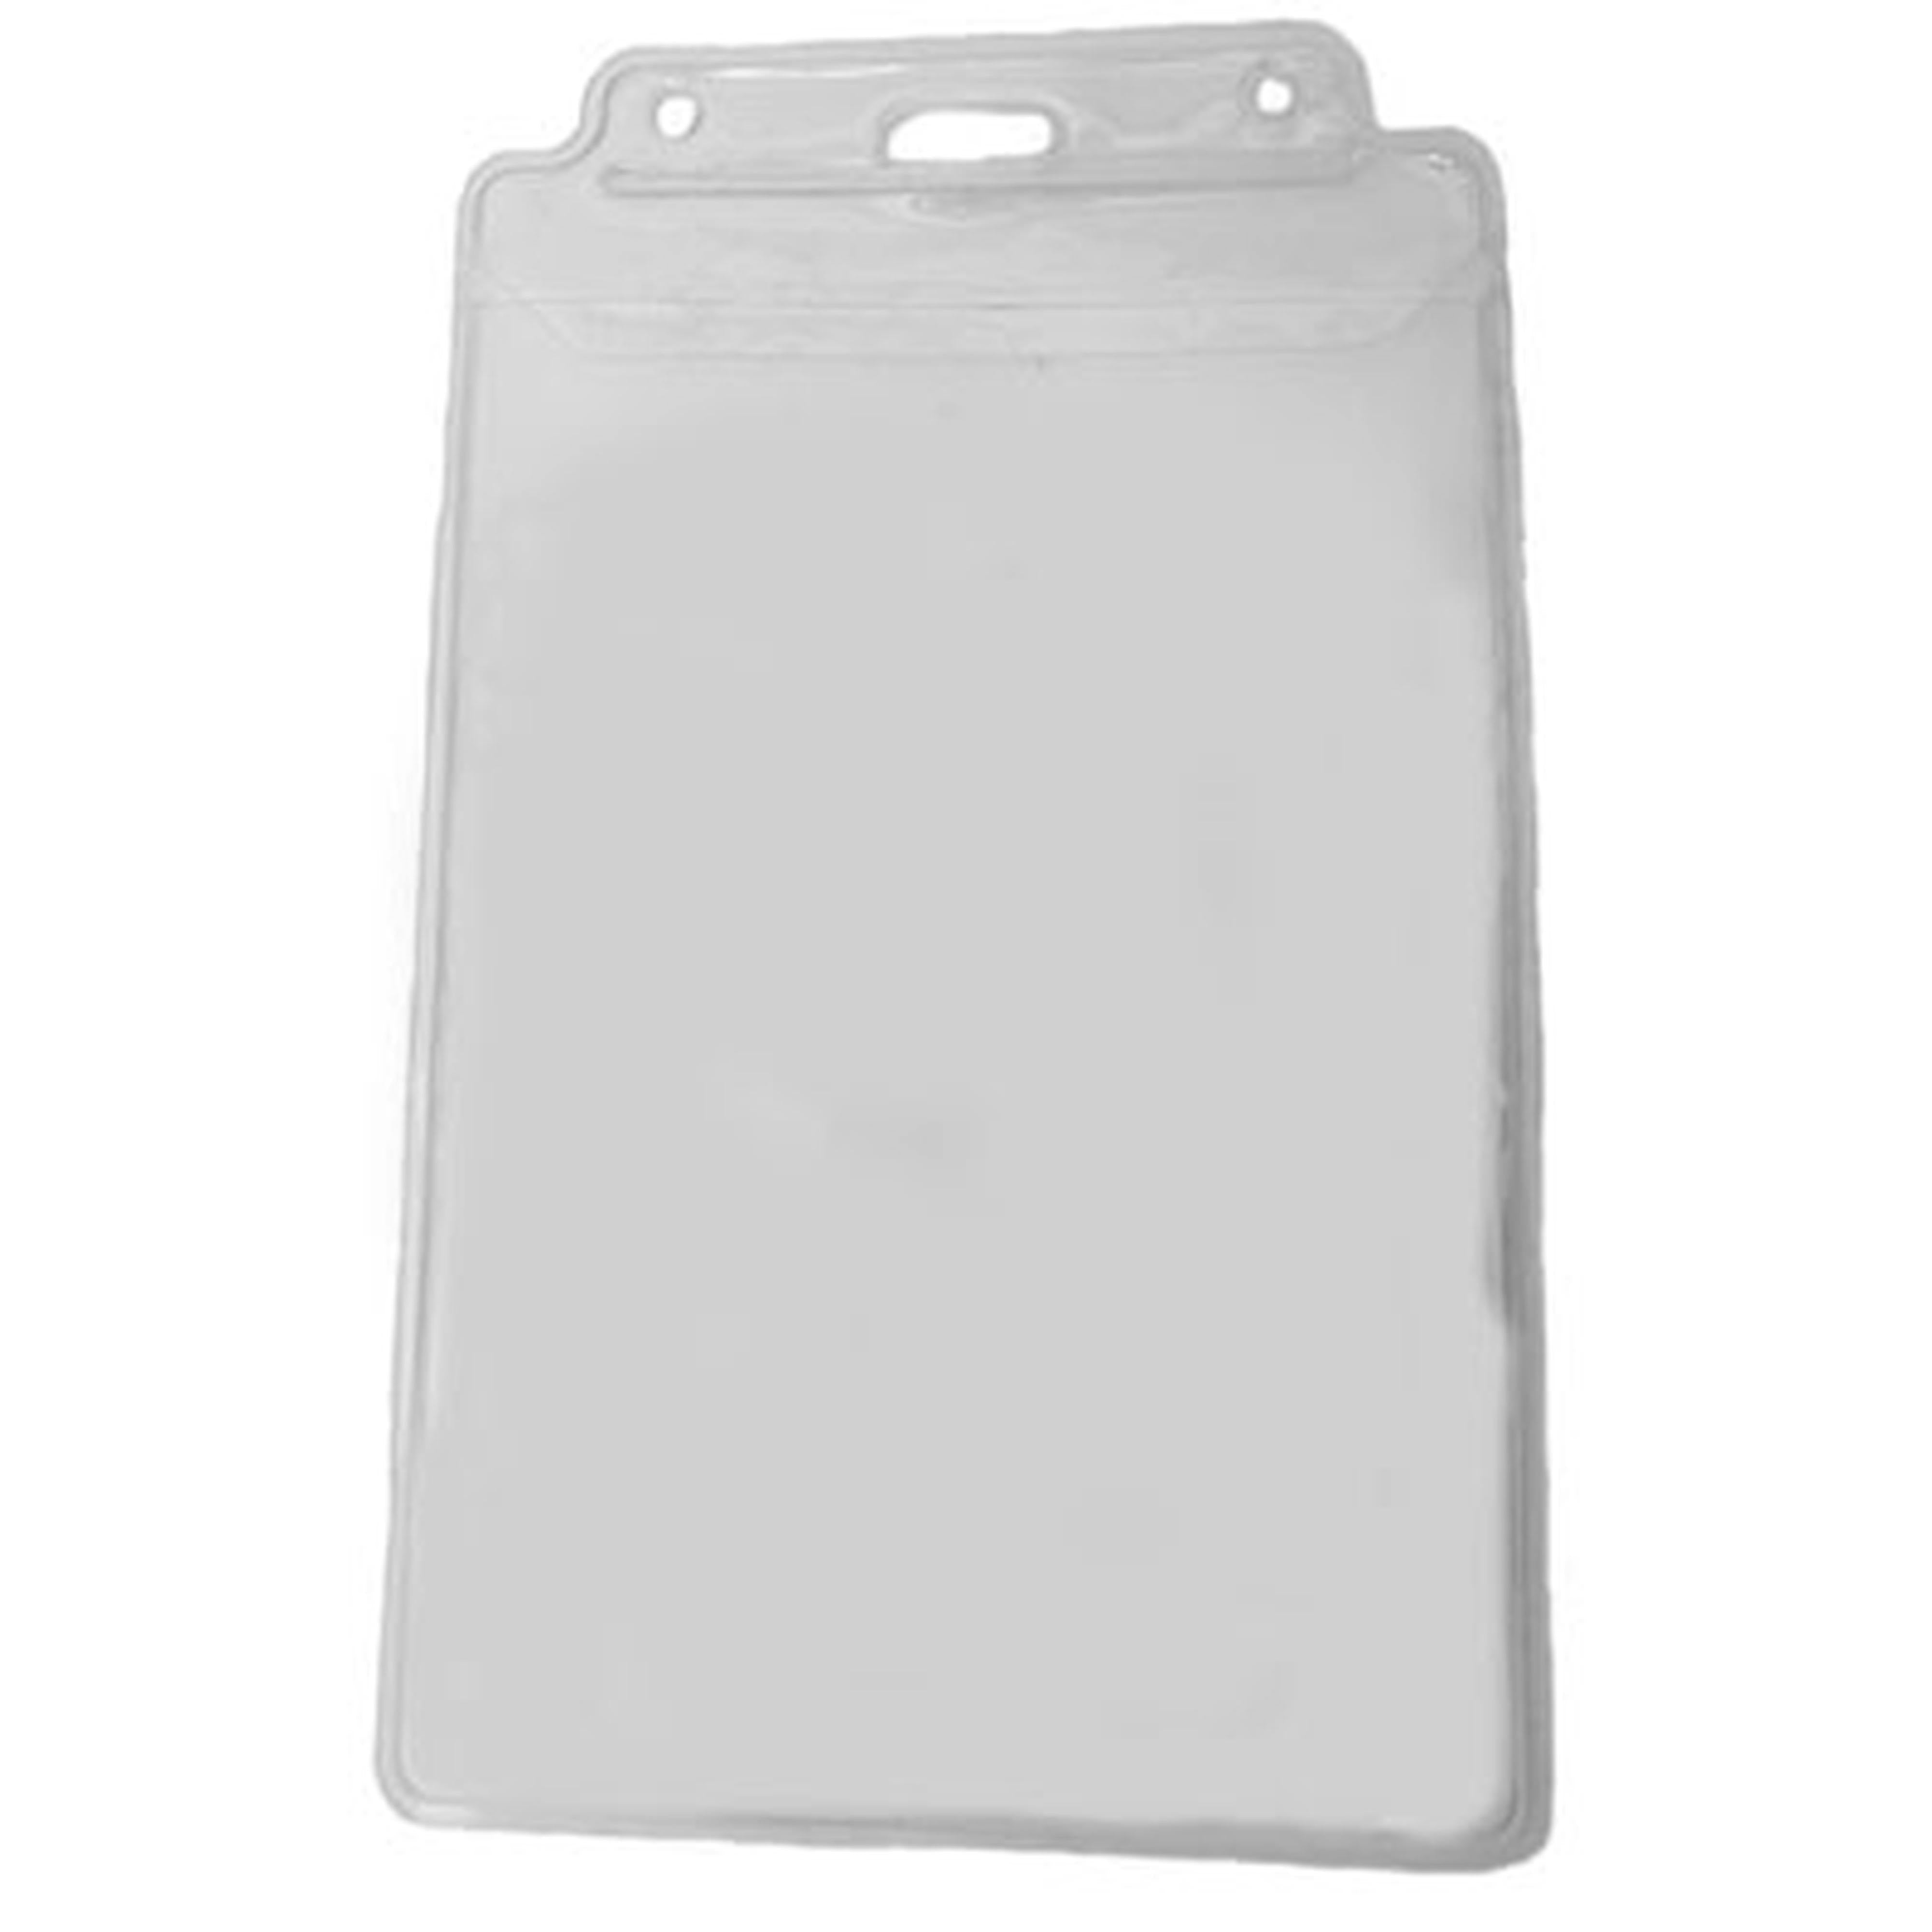 Clear Flexible Badge Holder with Resealable Closure